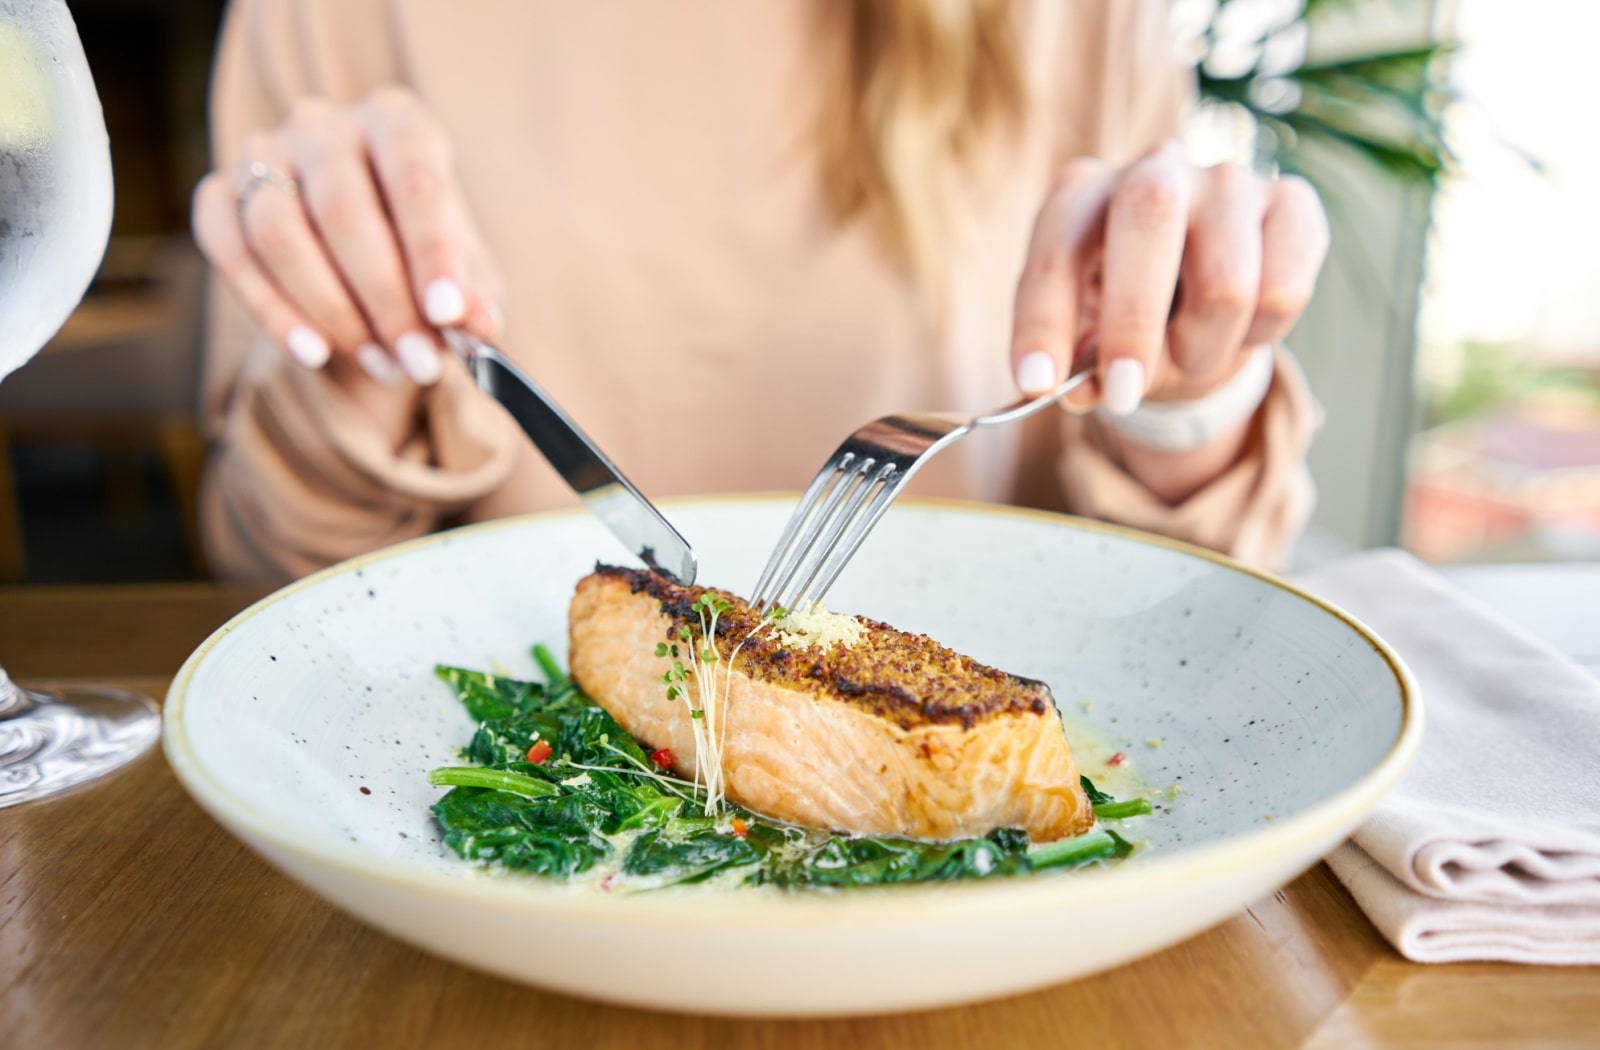 A close-up of a salmon steak fillet being cut by a woman using a fork and knife.